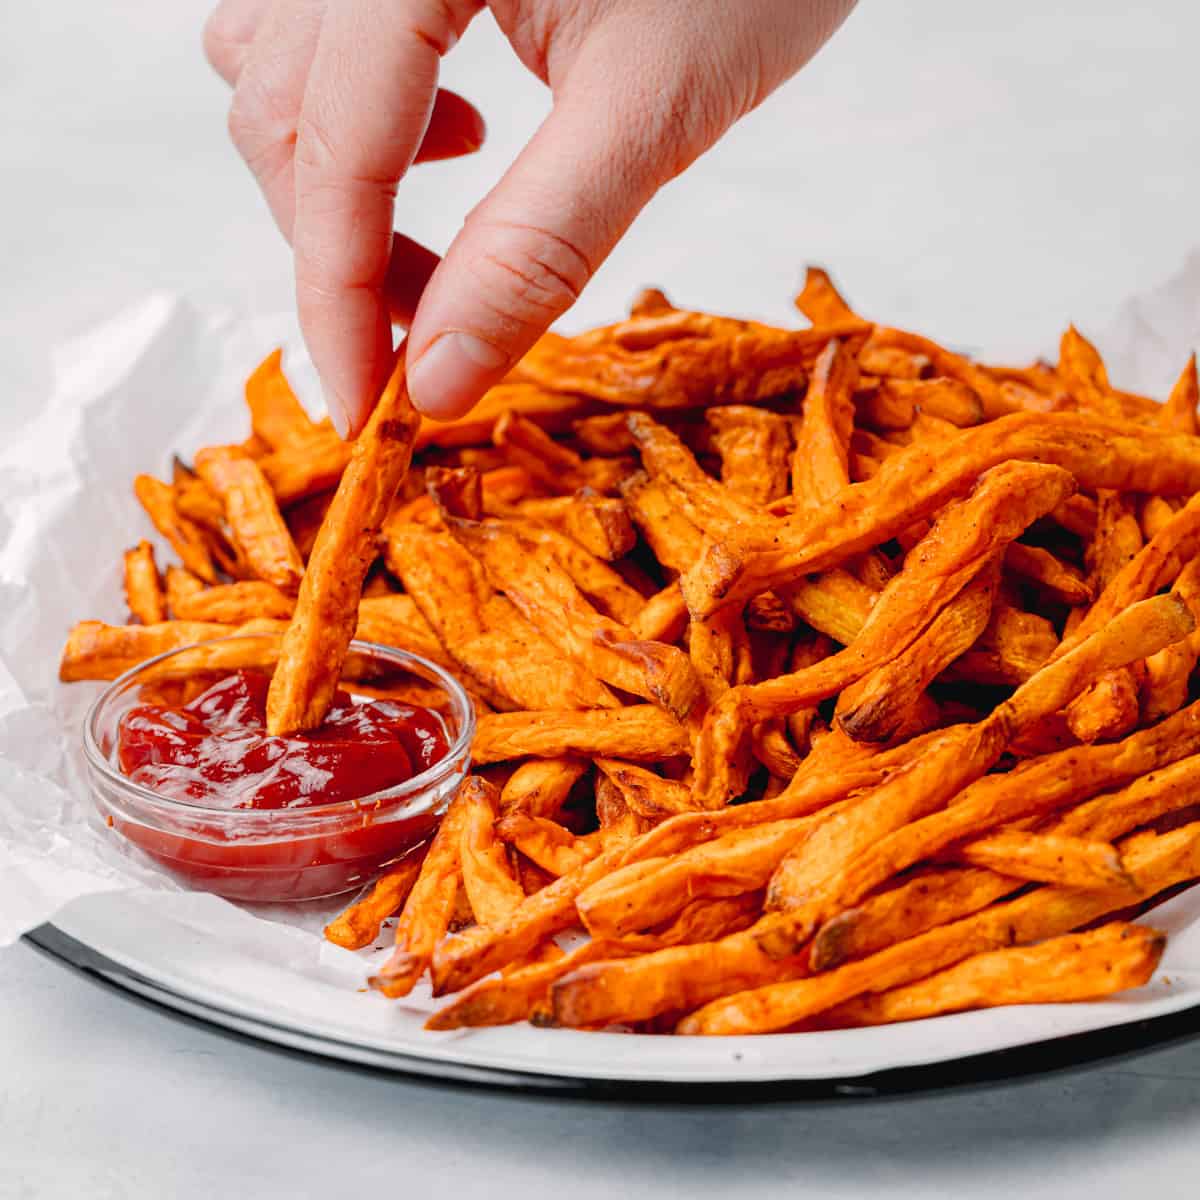 How to Cook Fries in An Air Fryer